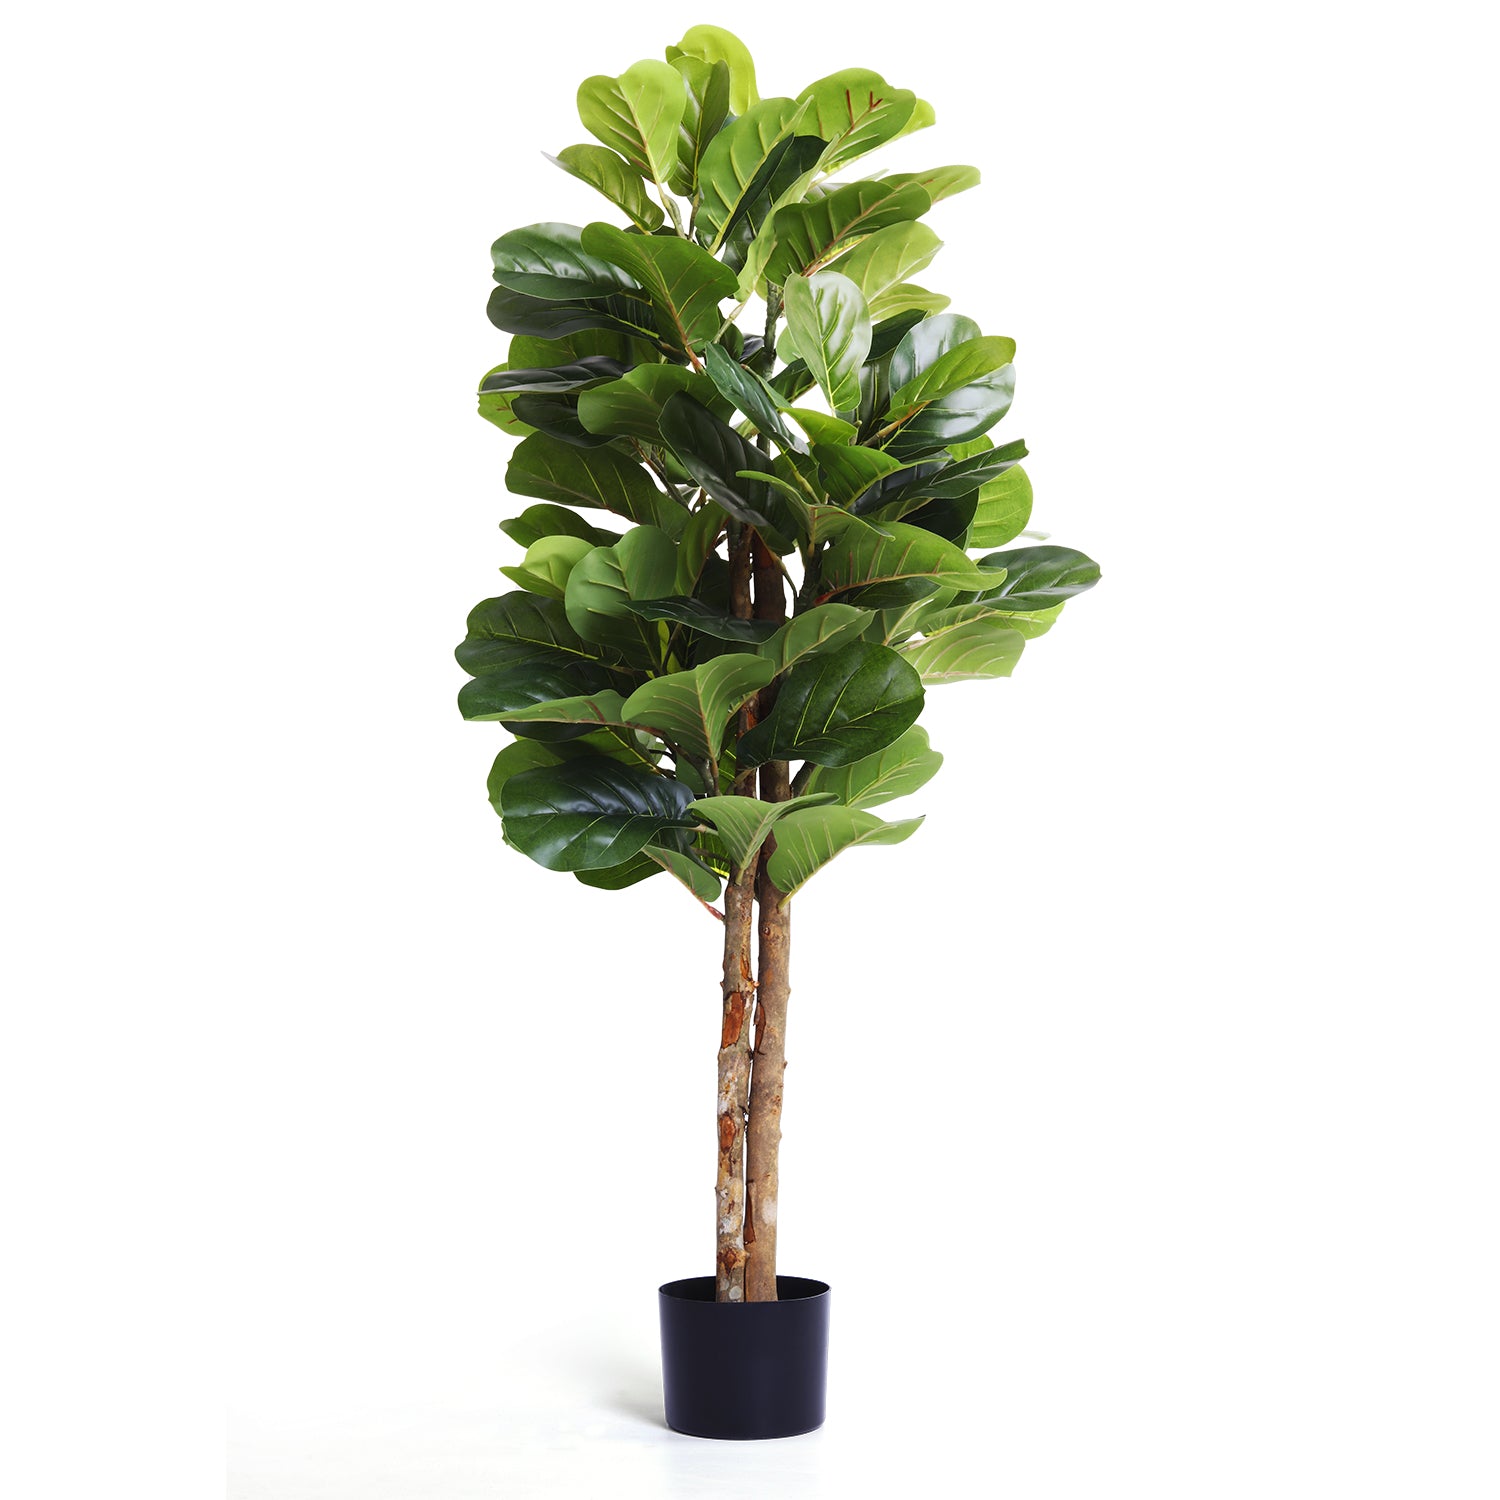 Artificial Linden Tree Branches: Realistic Fake Leaves for Plant